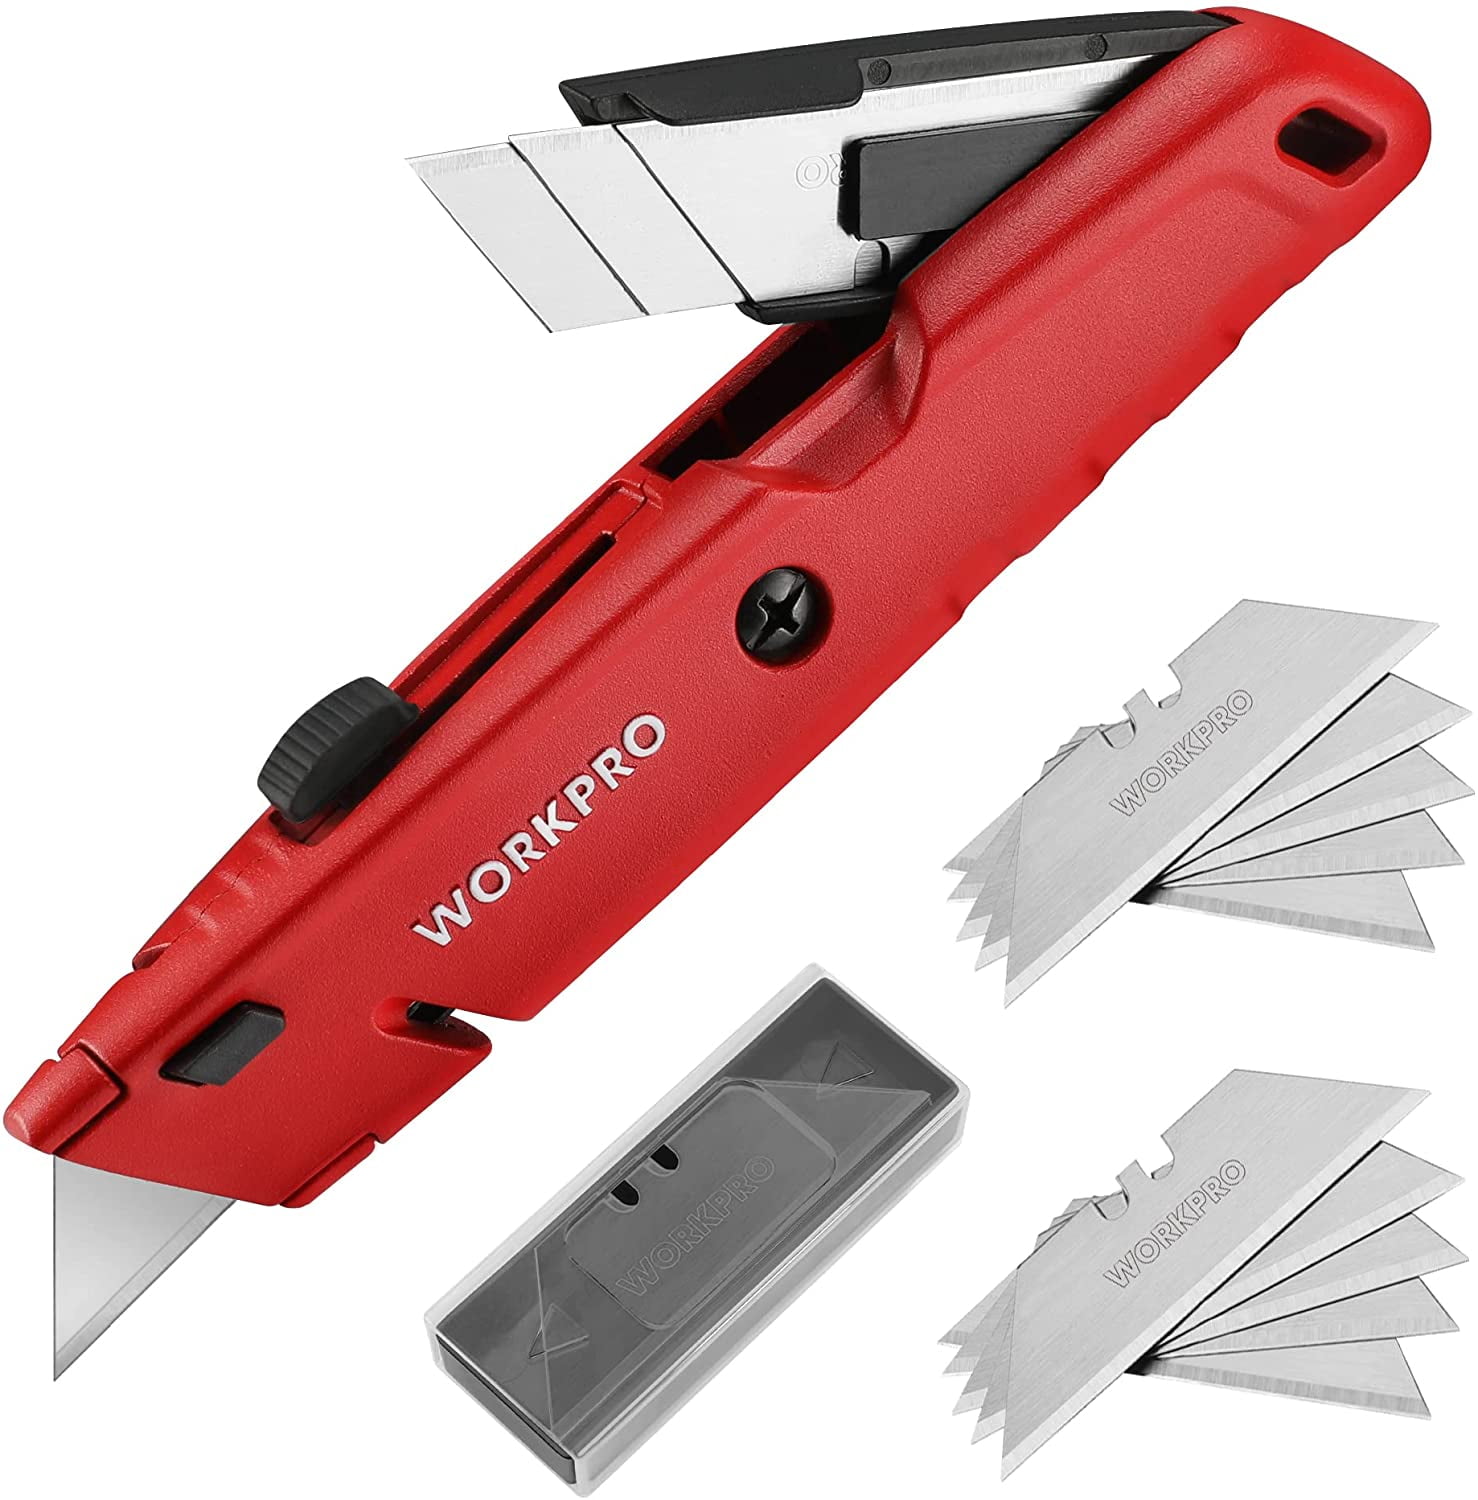 18mm Stainless Steel Box Cutter Retractable Utility Knife, Sharp Black SK5  Steel Blades Cutting Tools Package Opener